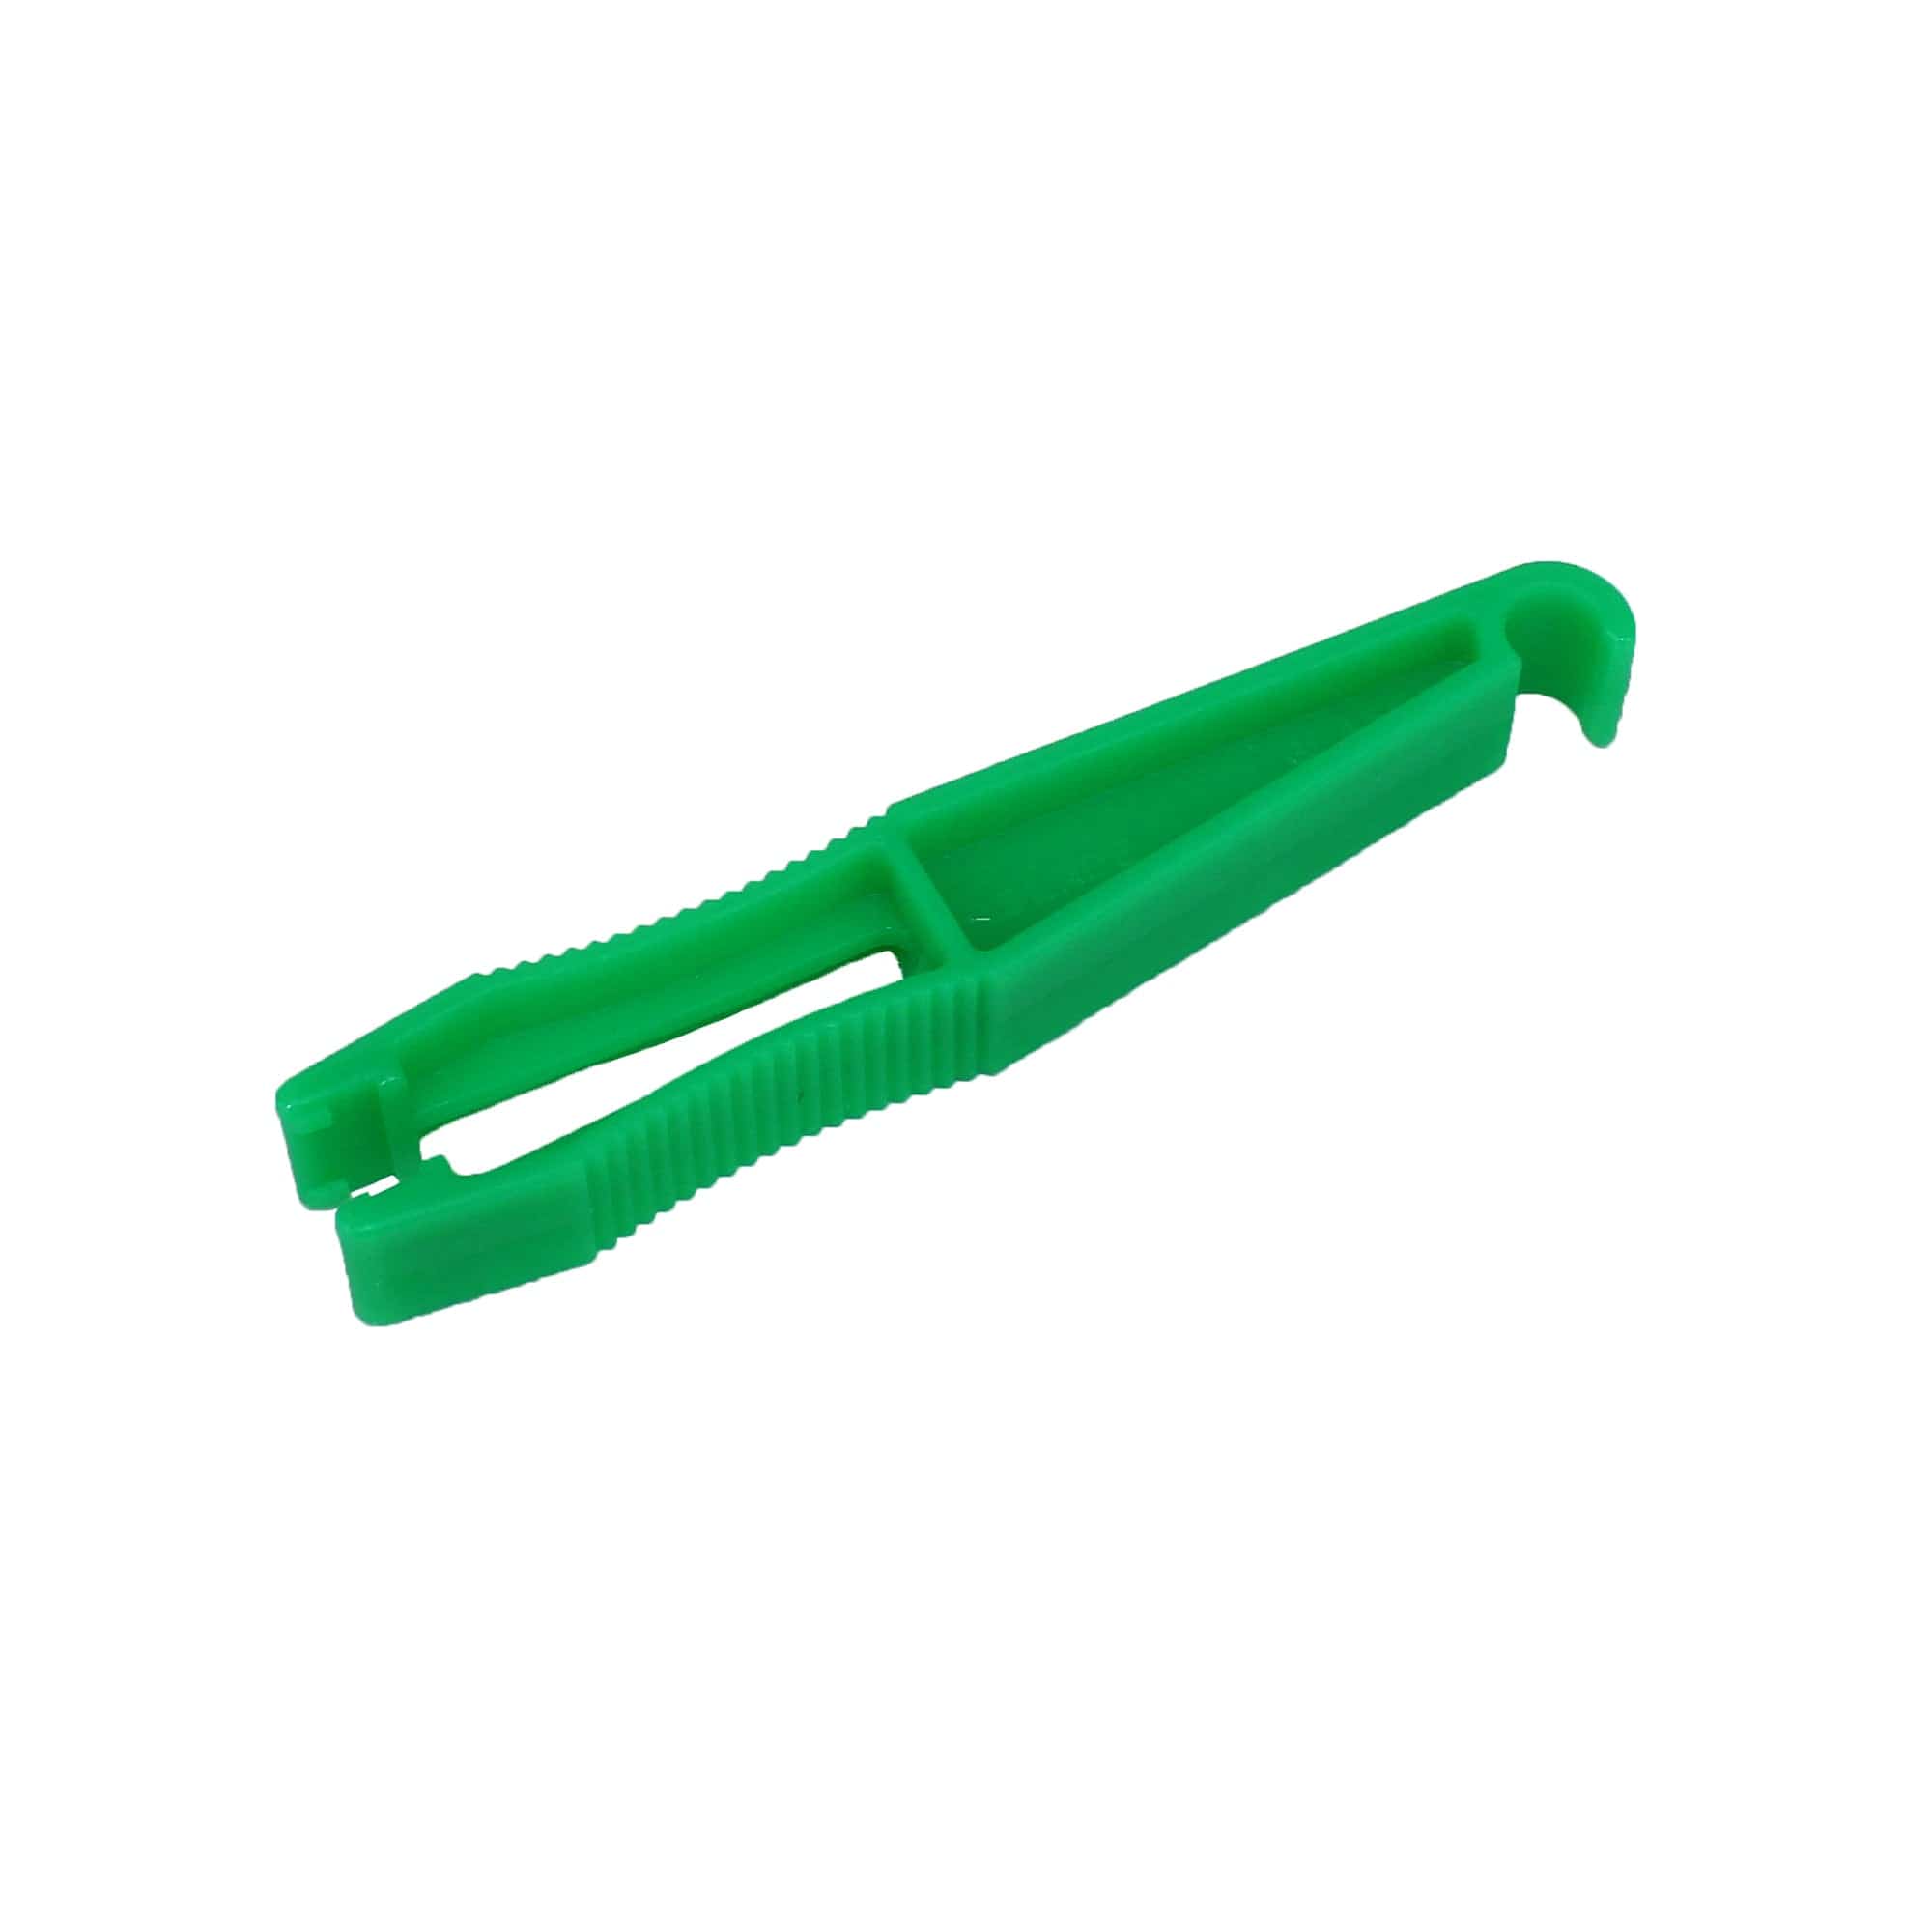 Littelfuse 00970023XP Fuse Puller for ATO / MINI / Glass Style Fuses